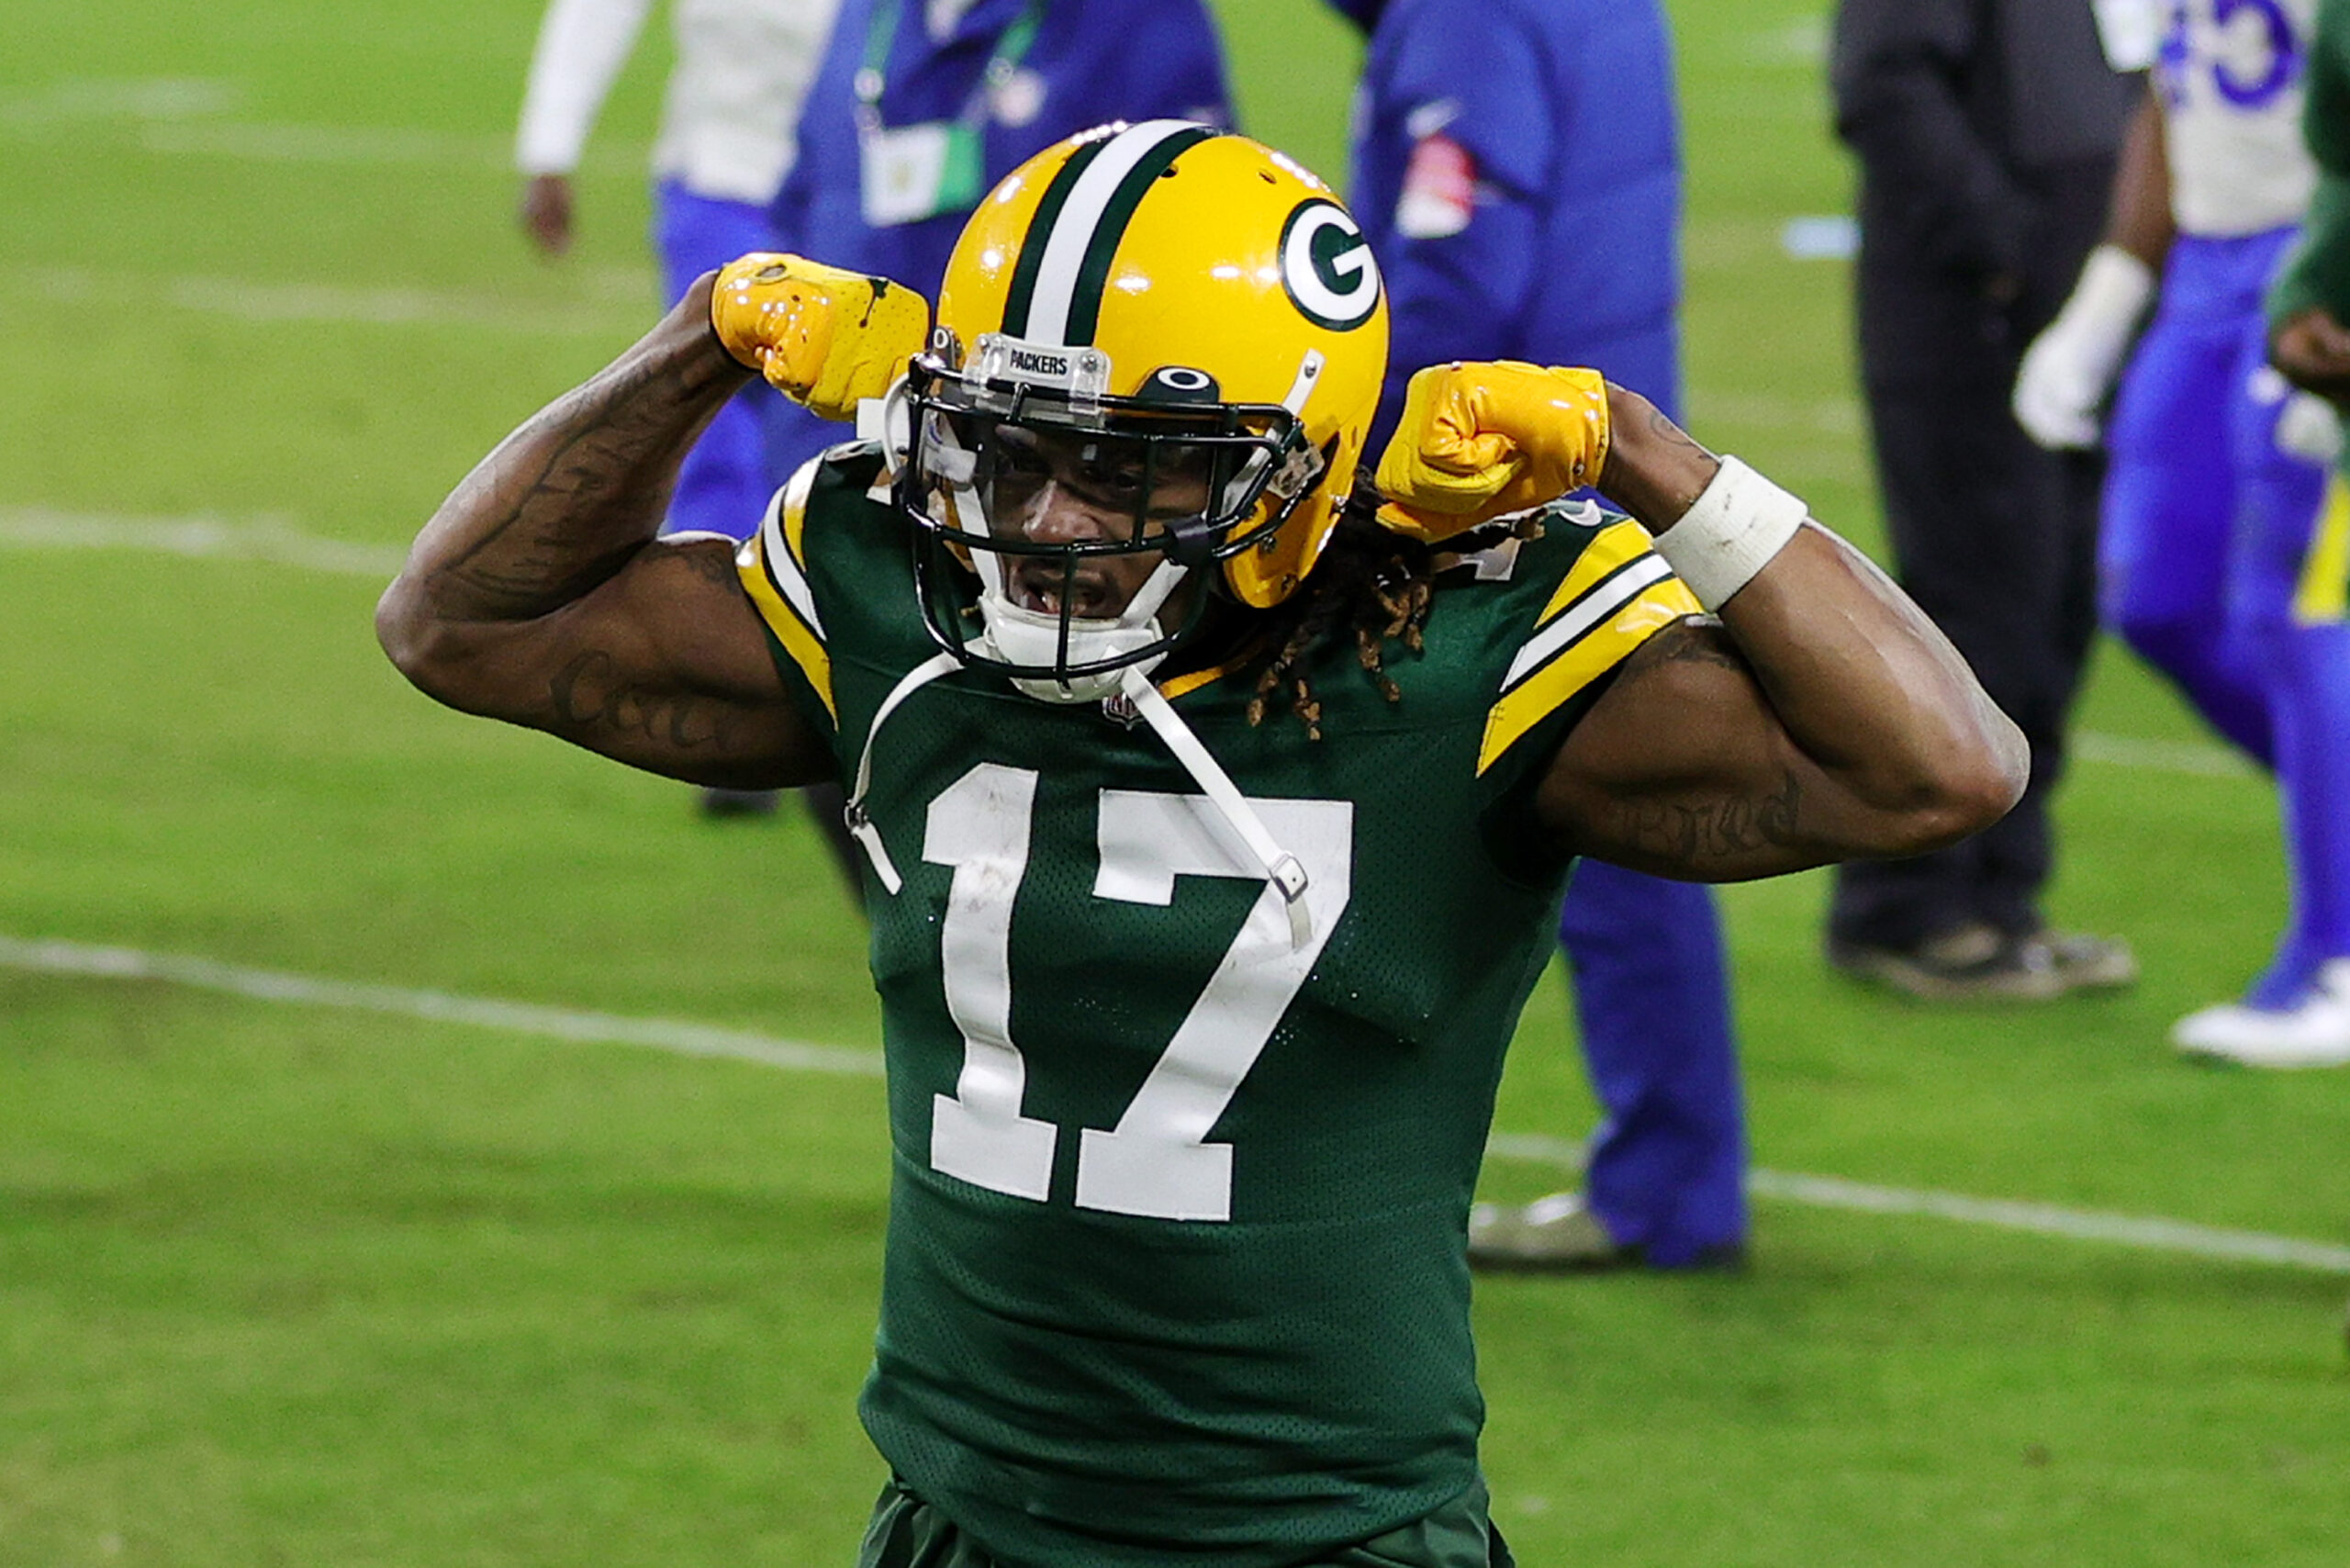 Davante Adams is now technically the highest paid wide receiver in the NFL.